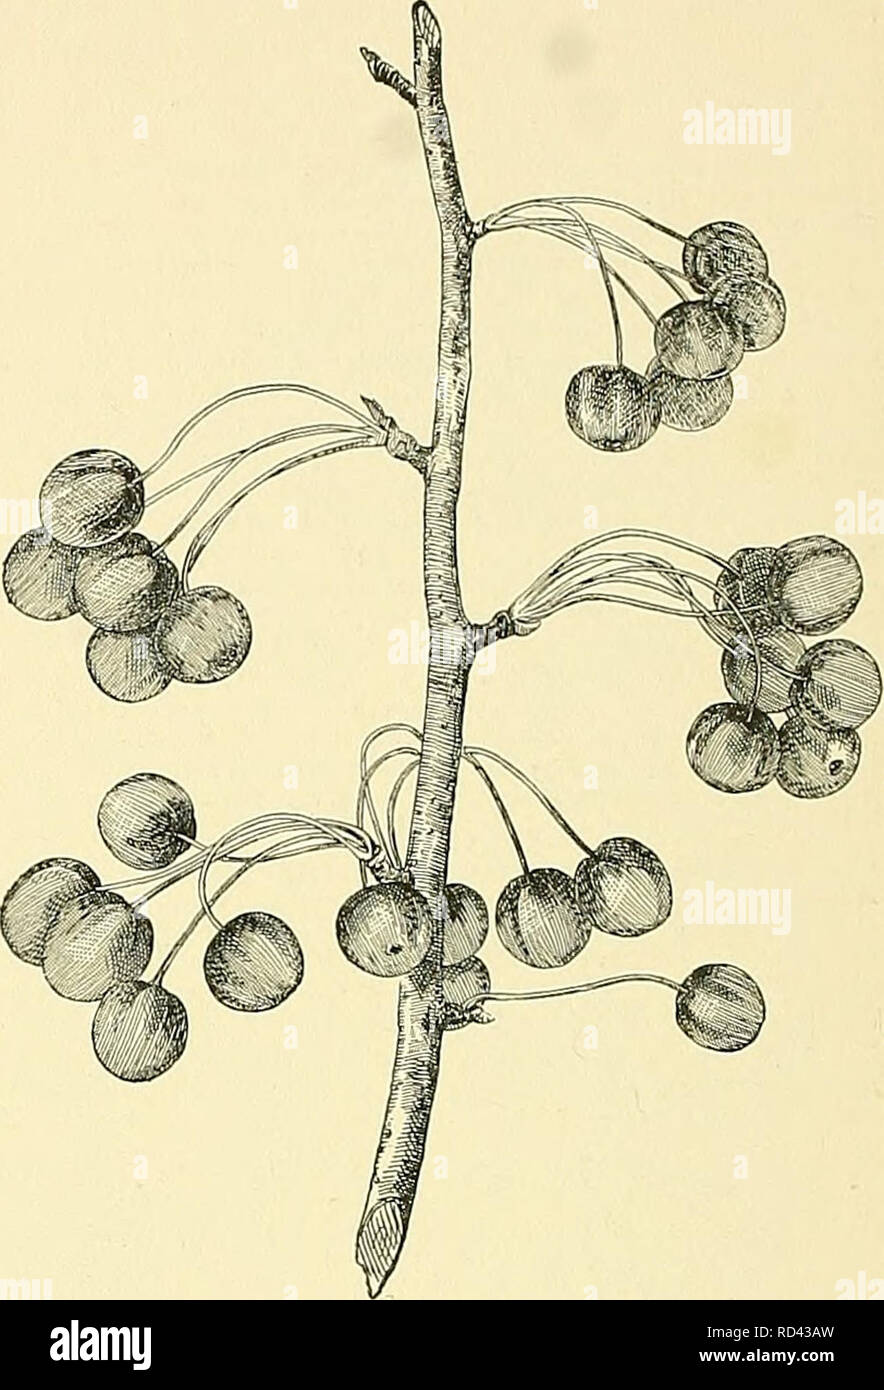 . Cyclopedia of American horticulture, comprising suggestions for cultivation of horticultural plants, descriptions of the species of fruits, vegetables, flowers, and ornamental plants sold in the United States and Canada, together with geographical and biographical sketches. Gardening. 2022. Pyrus communis (X K). lyx-tube, are tomentose when young, and the fr. taper- ing at the base. Var. Pyraster, Wallr., with roundish acute, strongly serrate Ivs.. which, with the calyx-tube, are glabrous when young, the fruit rounded at the base.. 2023. Pyrus Toringo (X K). See No. 6. 2. nivalis, Jacq. Snow Stock Photo